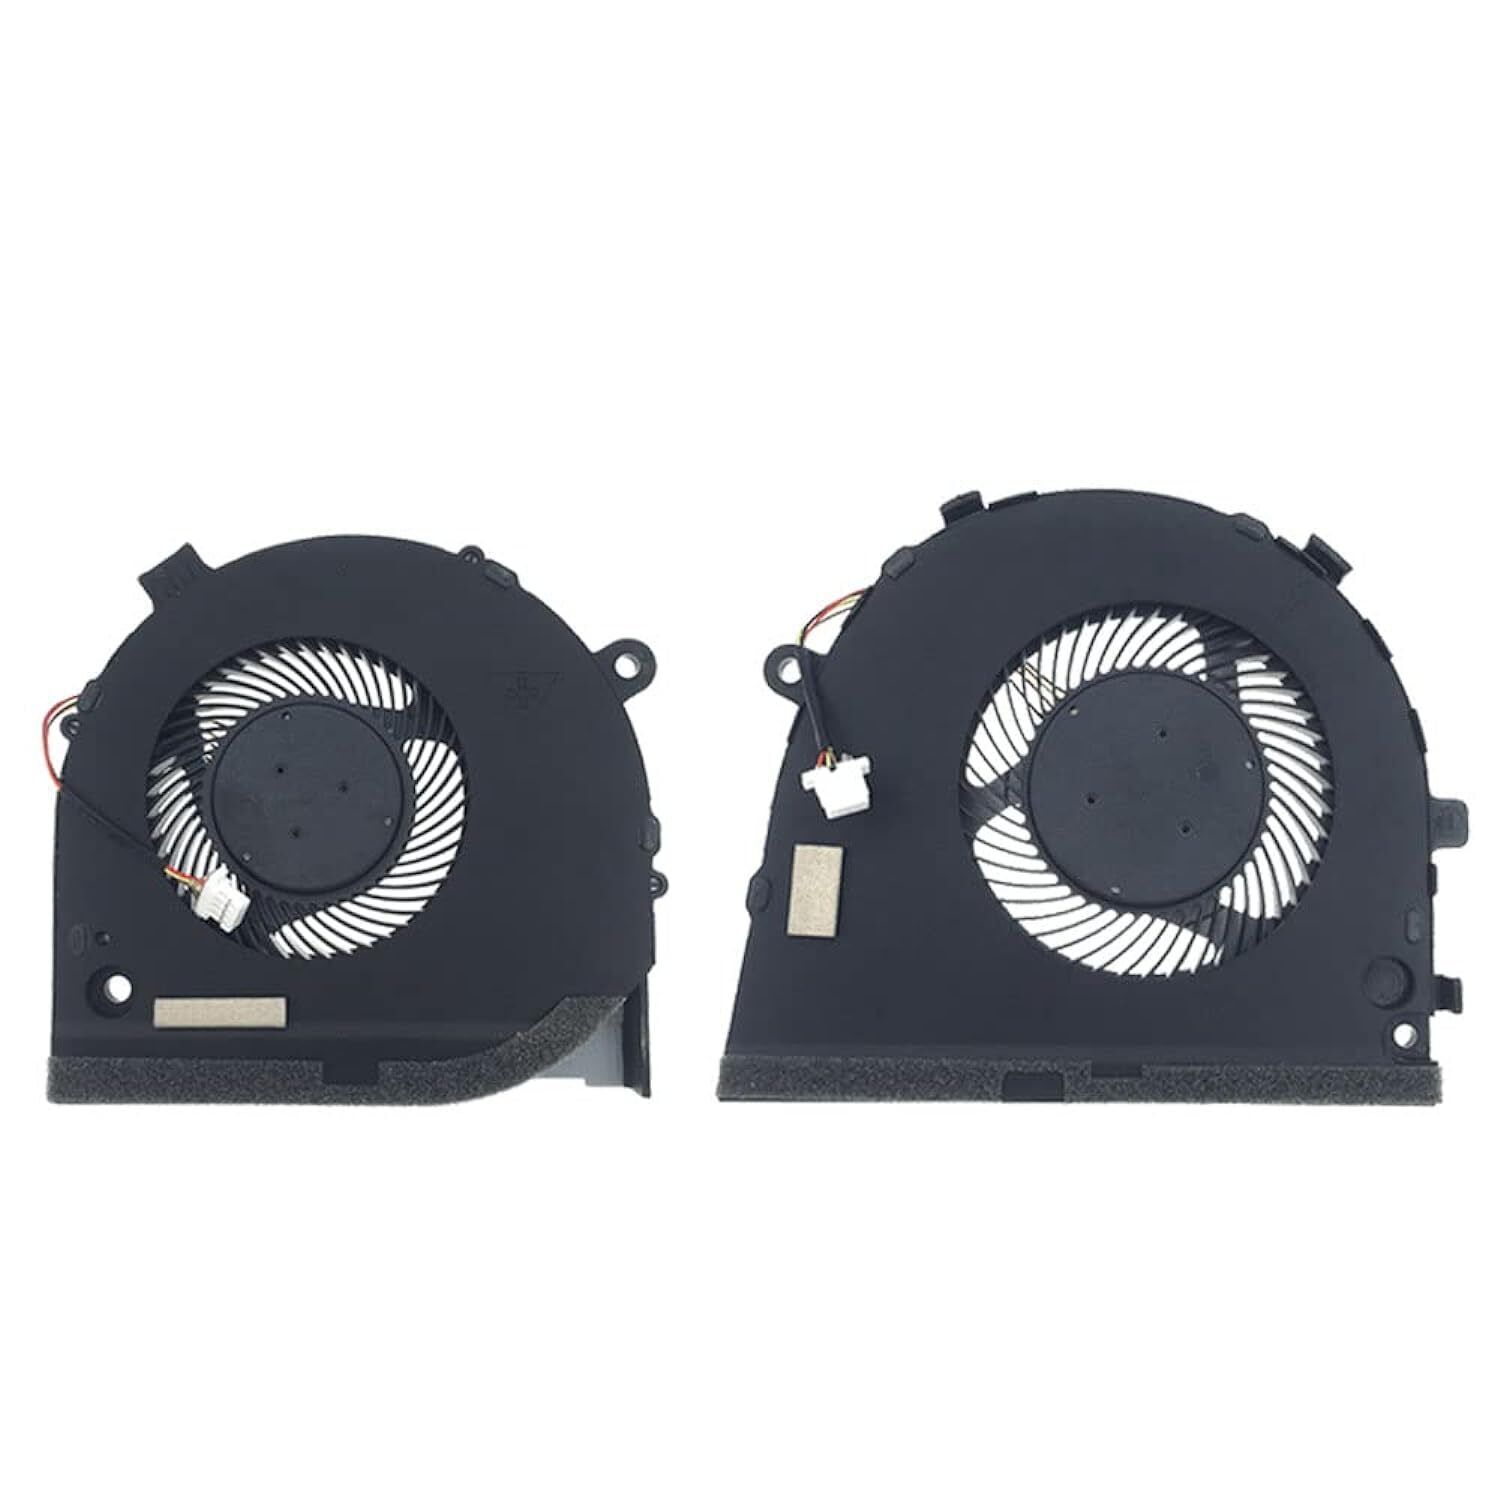 New Replacement Cooling Fans For Dell G3-3579 Gaming Series Laptop Cpu+Gpu Fan